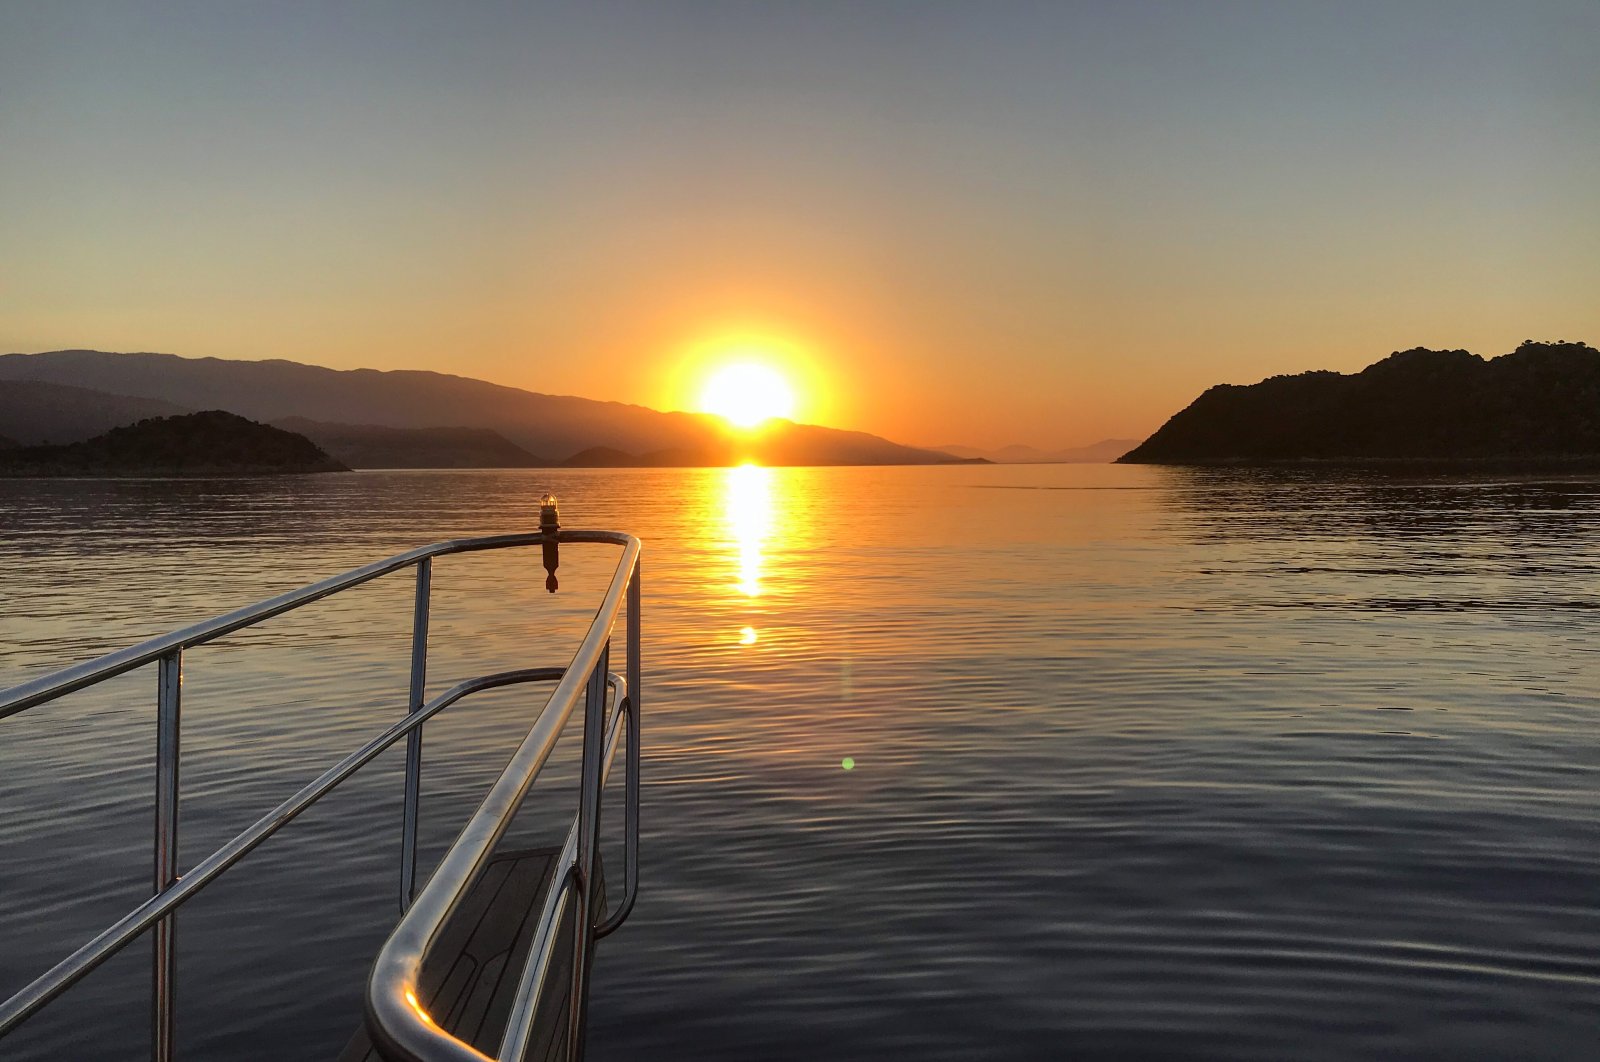 Sunrise during a blue cruise voyage is an experience to behold. (Photo by Özge Şengelen)